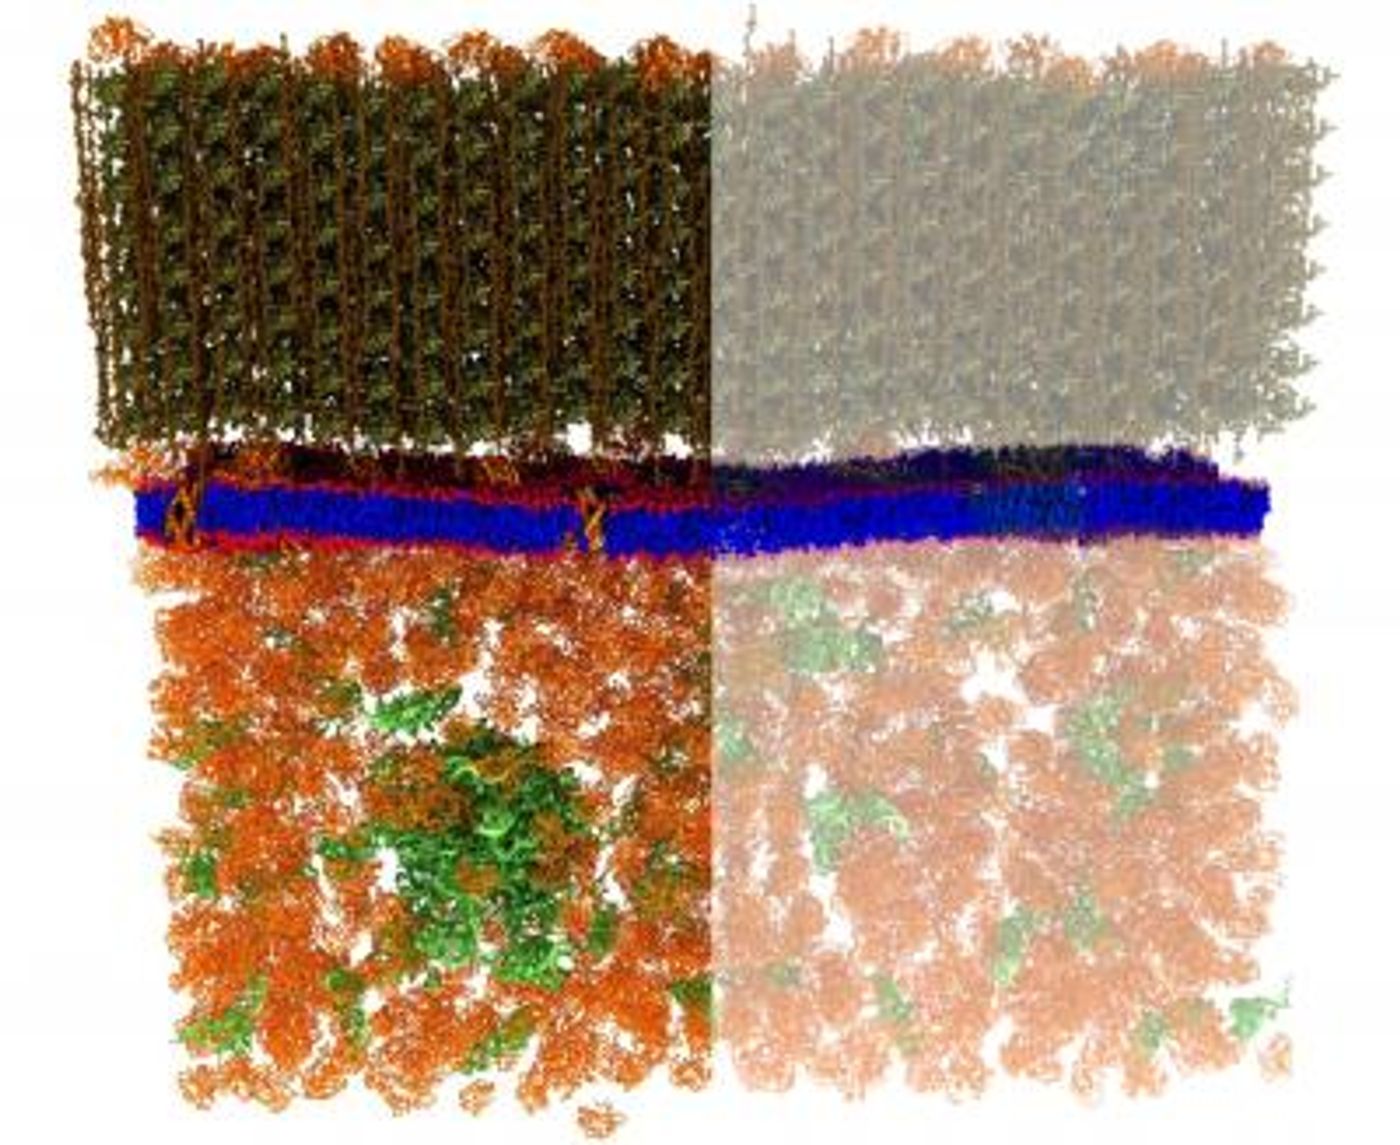 Neutron scattering is a valuable technique for studying cell membranes, but signals from the cell's other components such as proteins, RNA, DNA and carbohydrates can get in the way (left). An ORNL team made these other components practically invisible to neutrons by combining specific levels of heavy hydrogen (deuterium) with normal hydrogen within the cell. / Credit: Xiaolin Cheng and Mike Matheson, Oak Ridge National Laboratory/Dept. of Energy